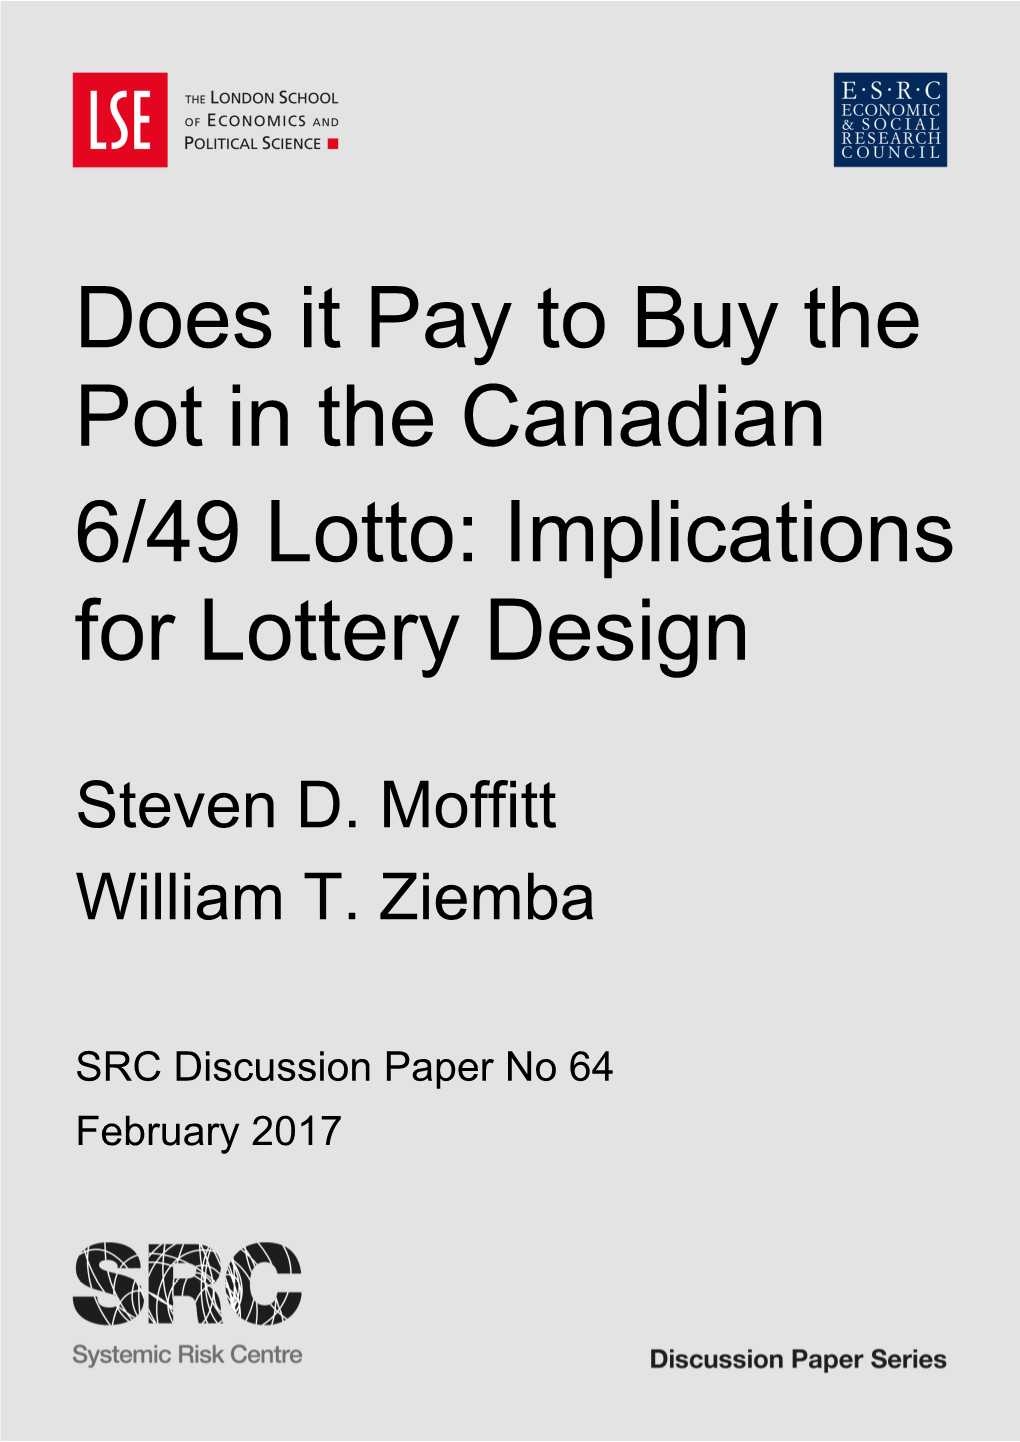 Does It Pay to Buy the Pot in the Canadian 6/49 Lotto: Implications for Lottery Design